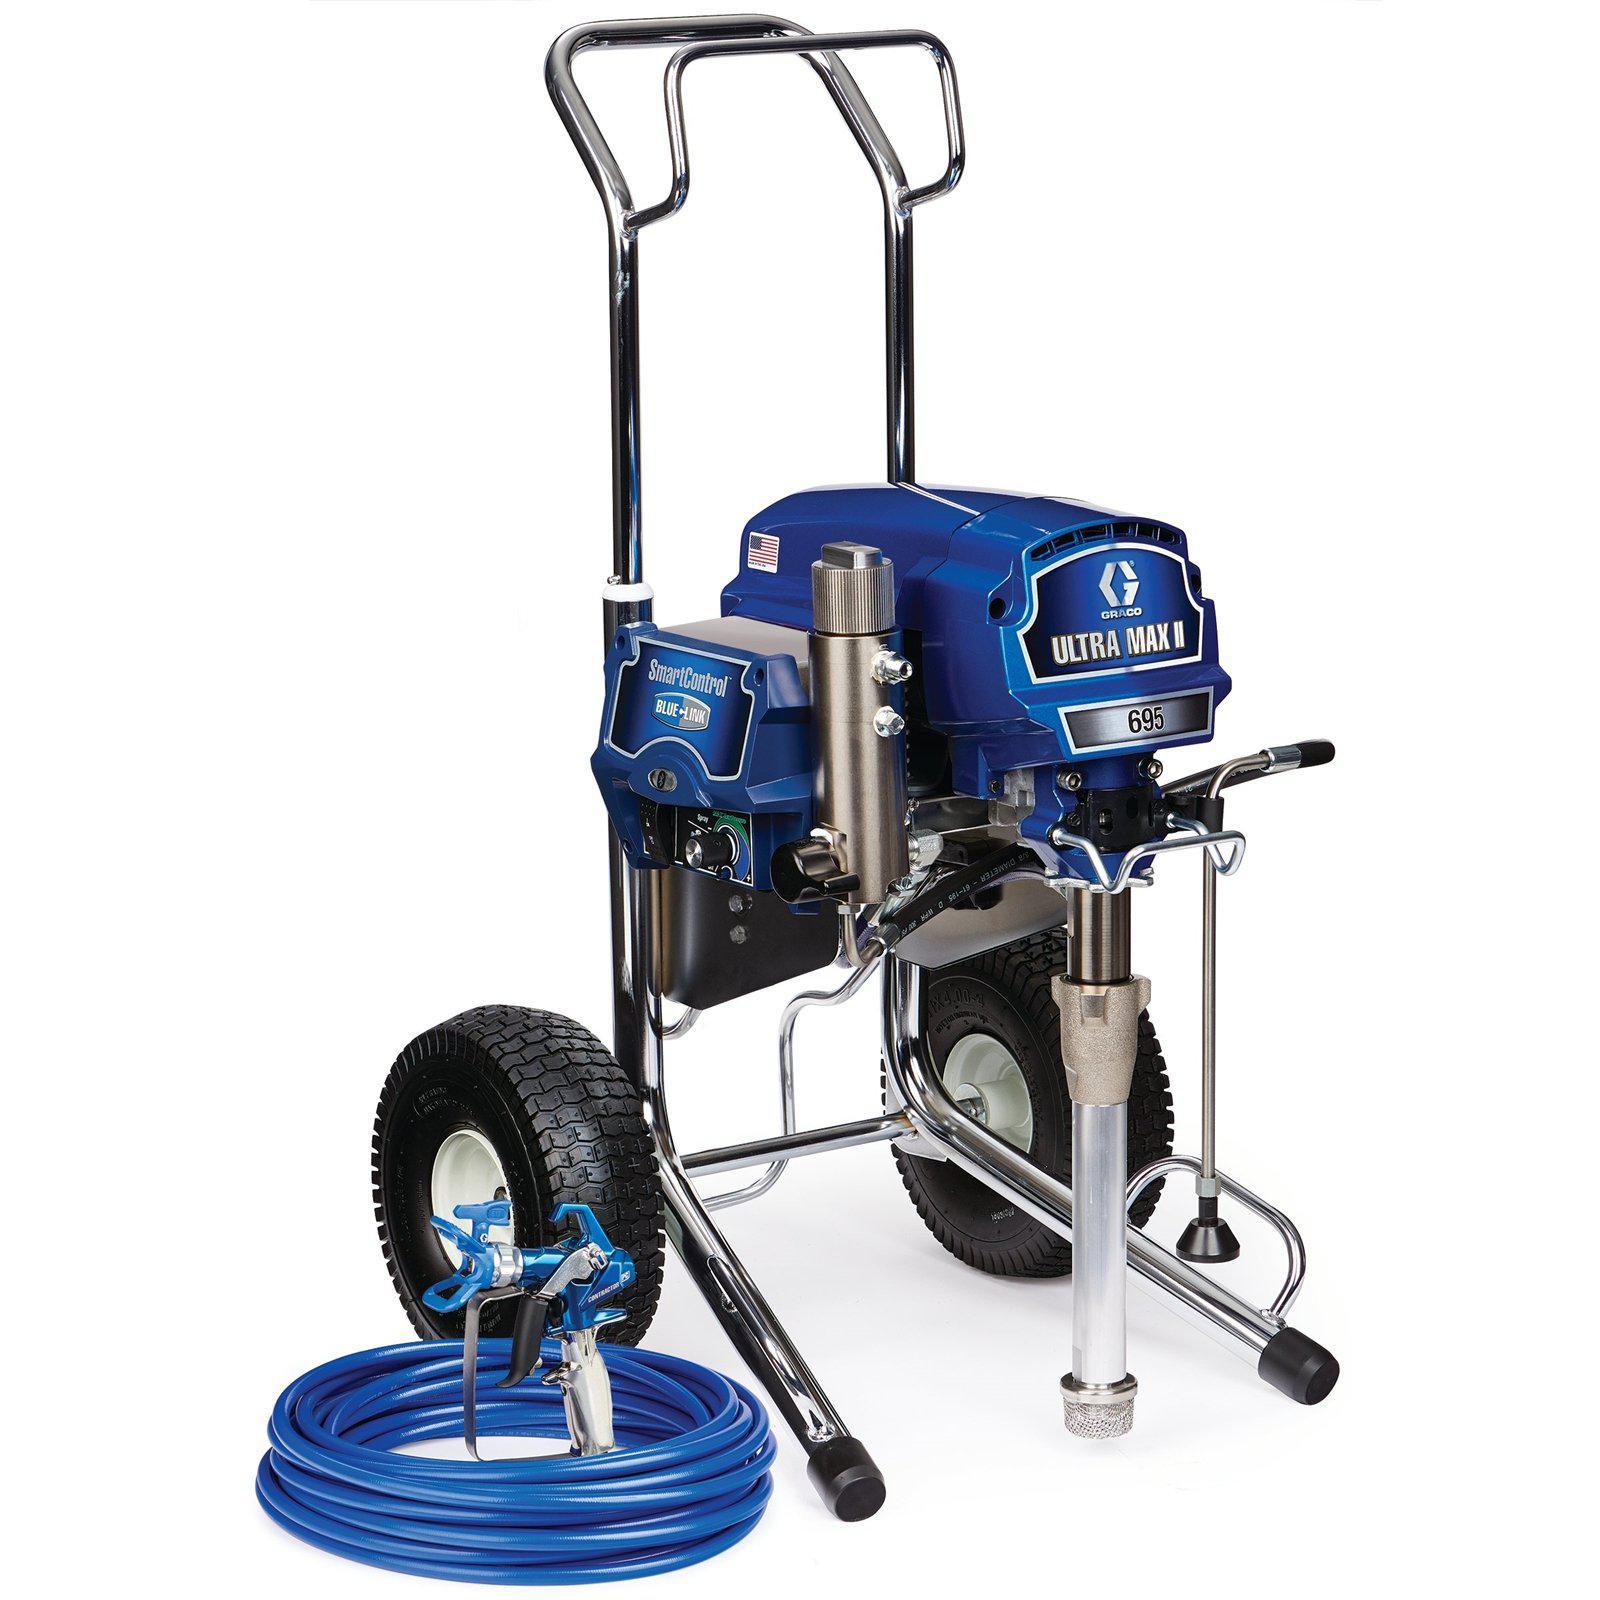 Graco Ultra 395 PC Stand Electric Airless Paint Sprayer 17E844